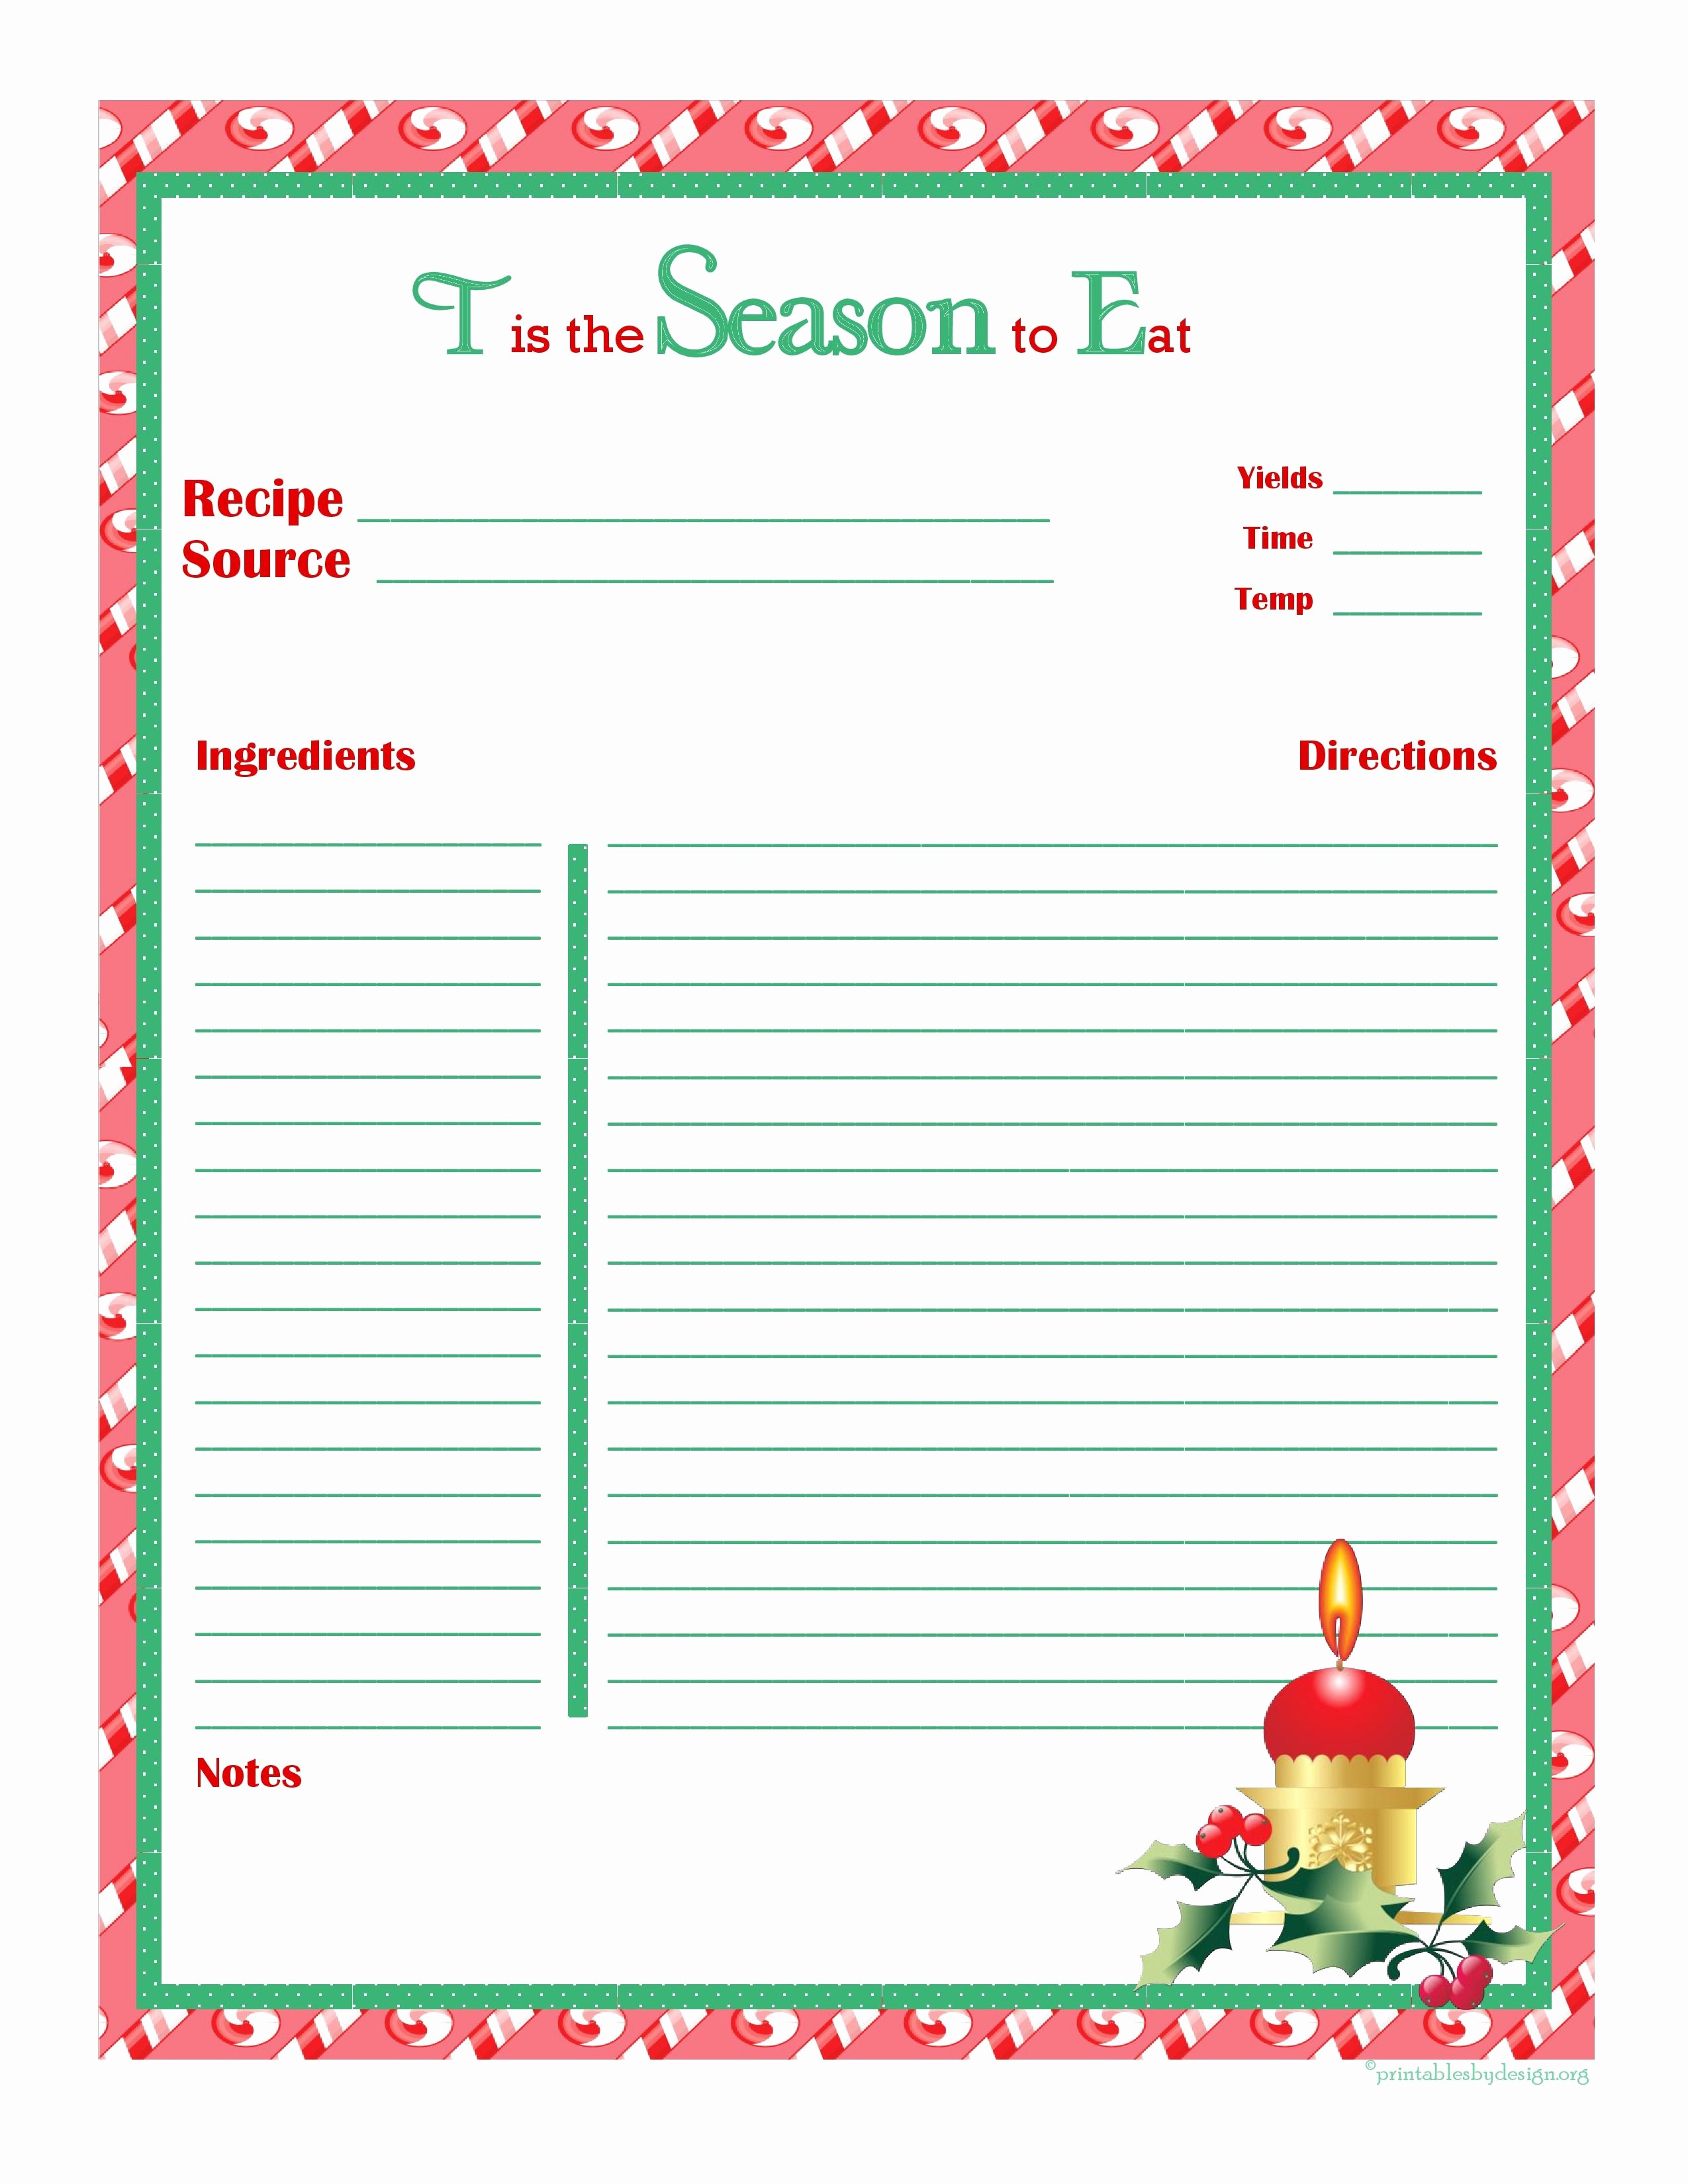 Holiday Recipe Card Template Free Luxury Christmas Recipe Card Full Page